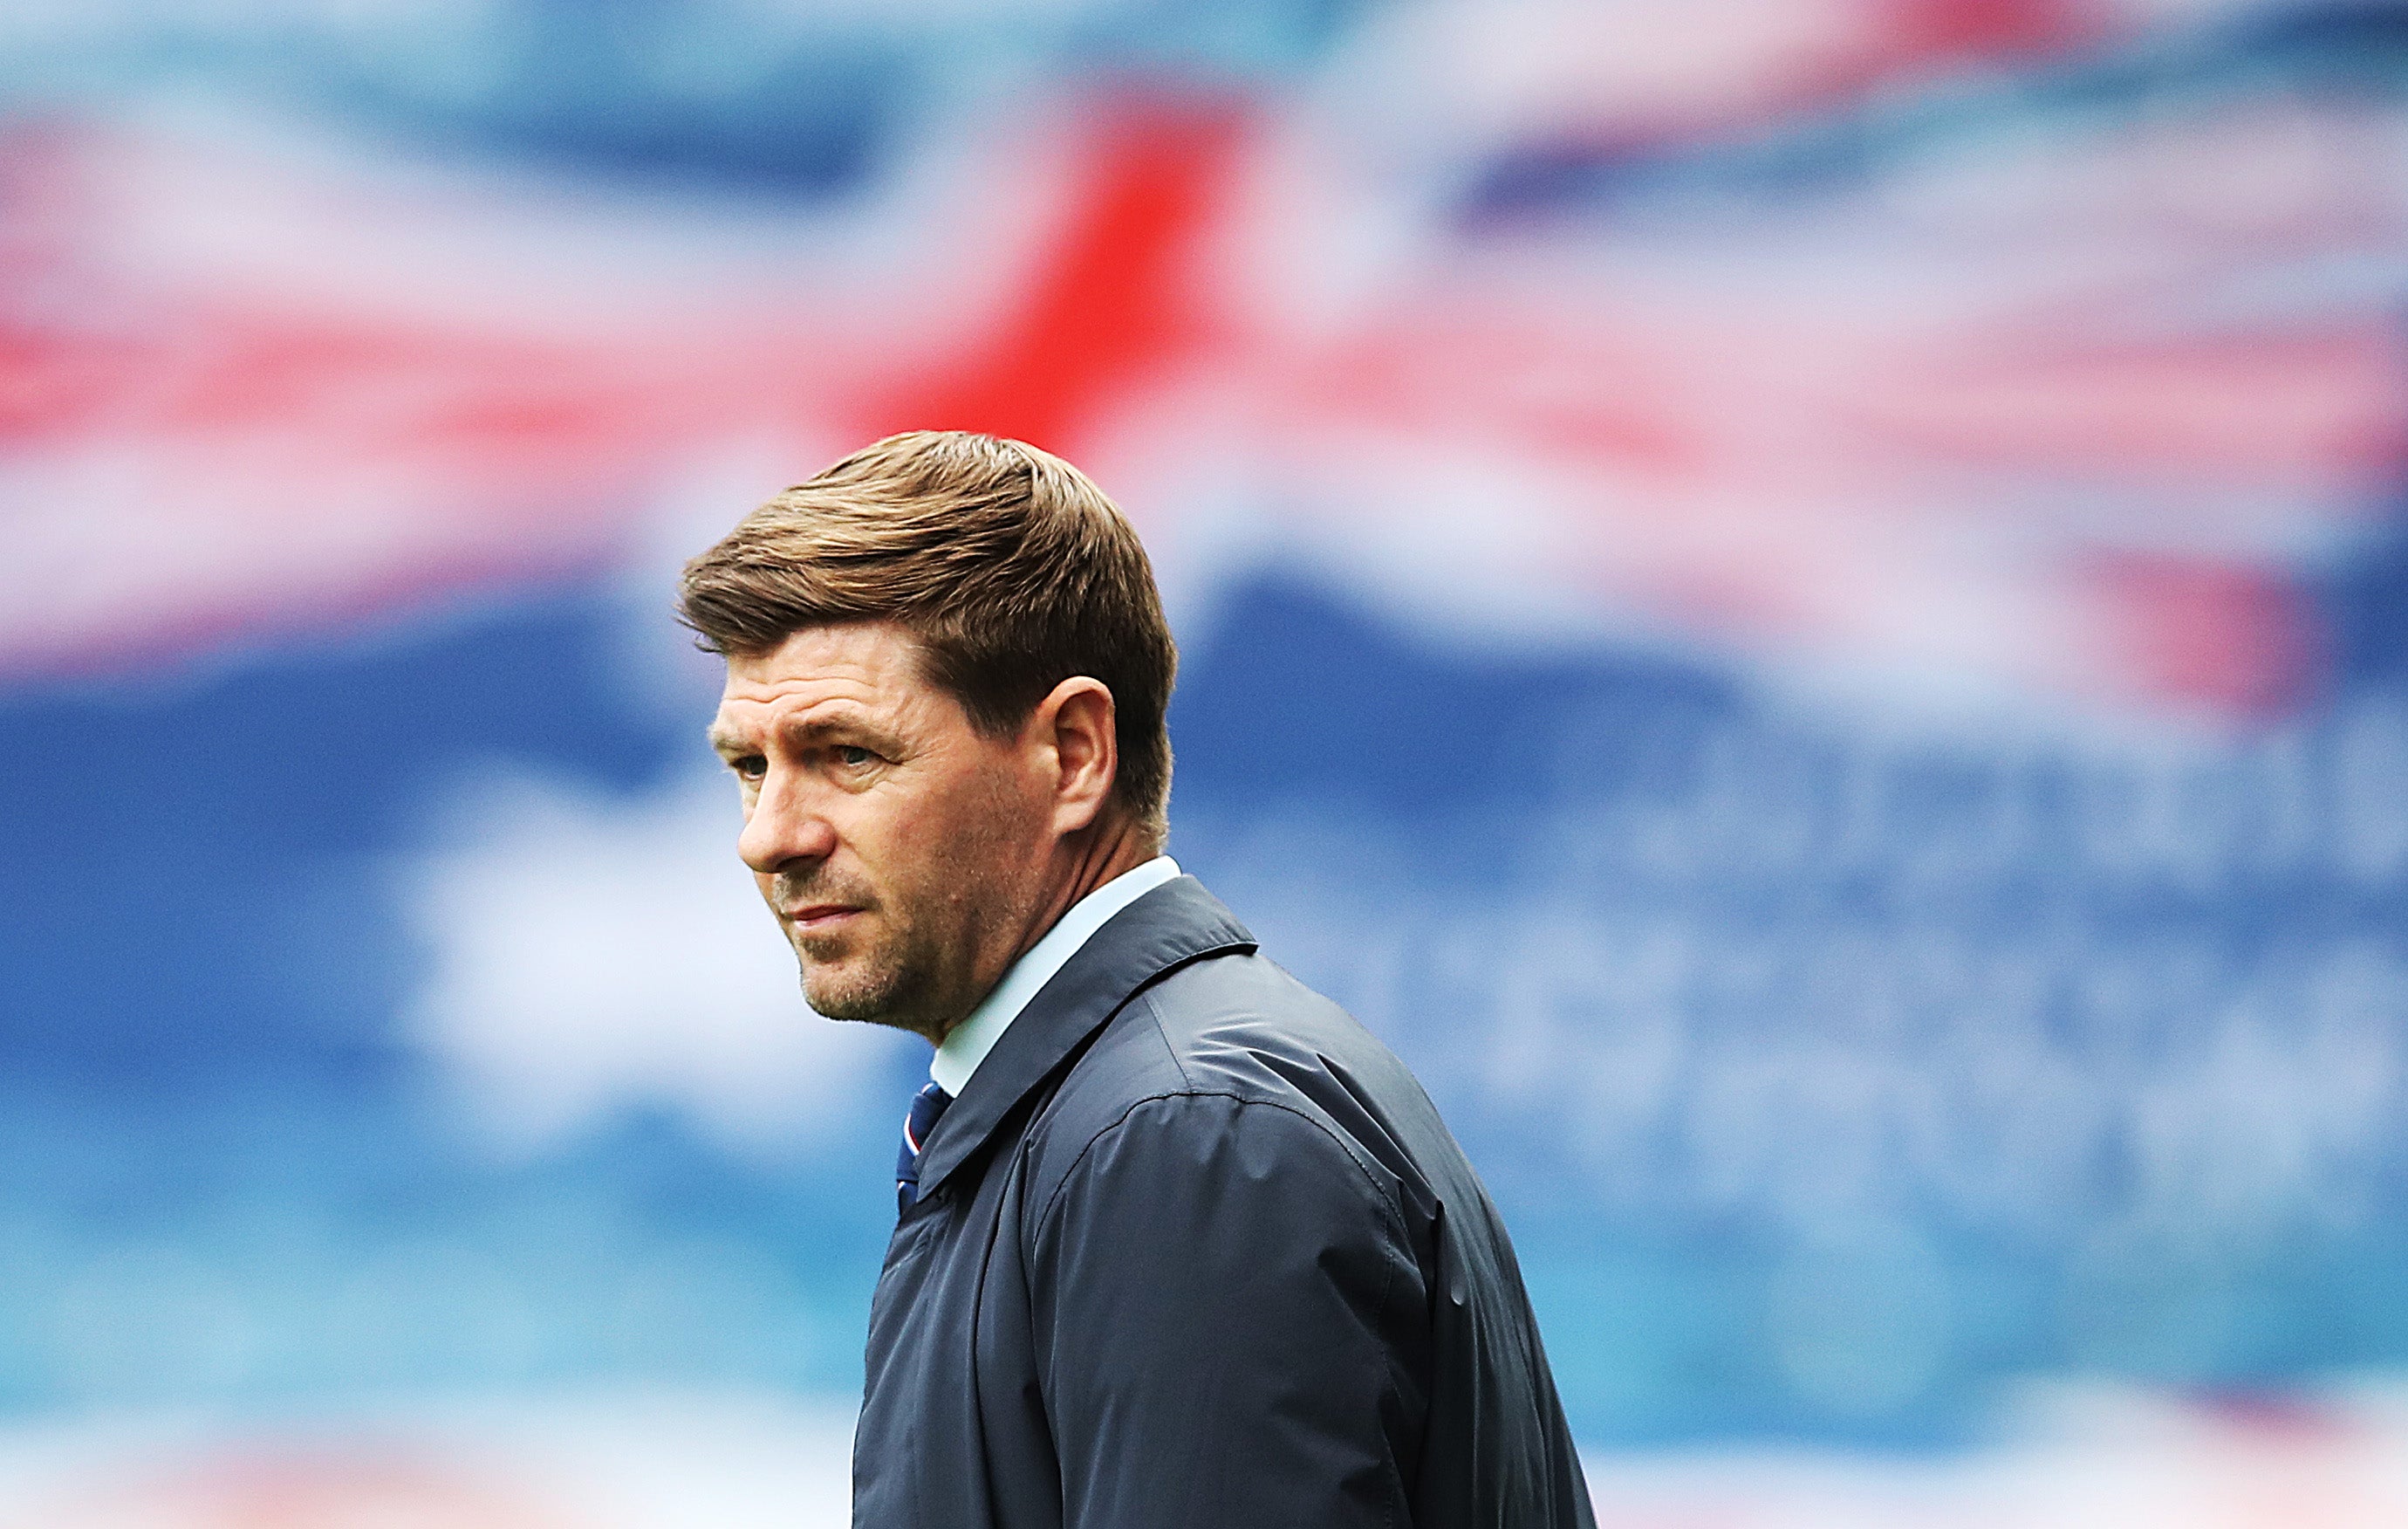 Steven Gerrard has sealed the title with Rangers